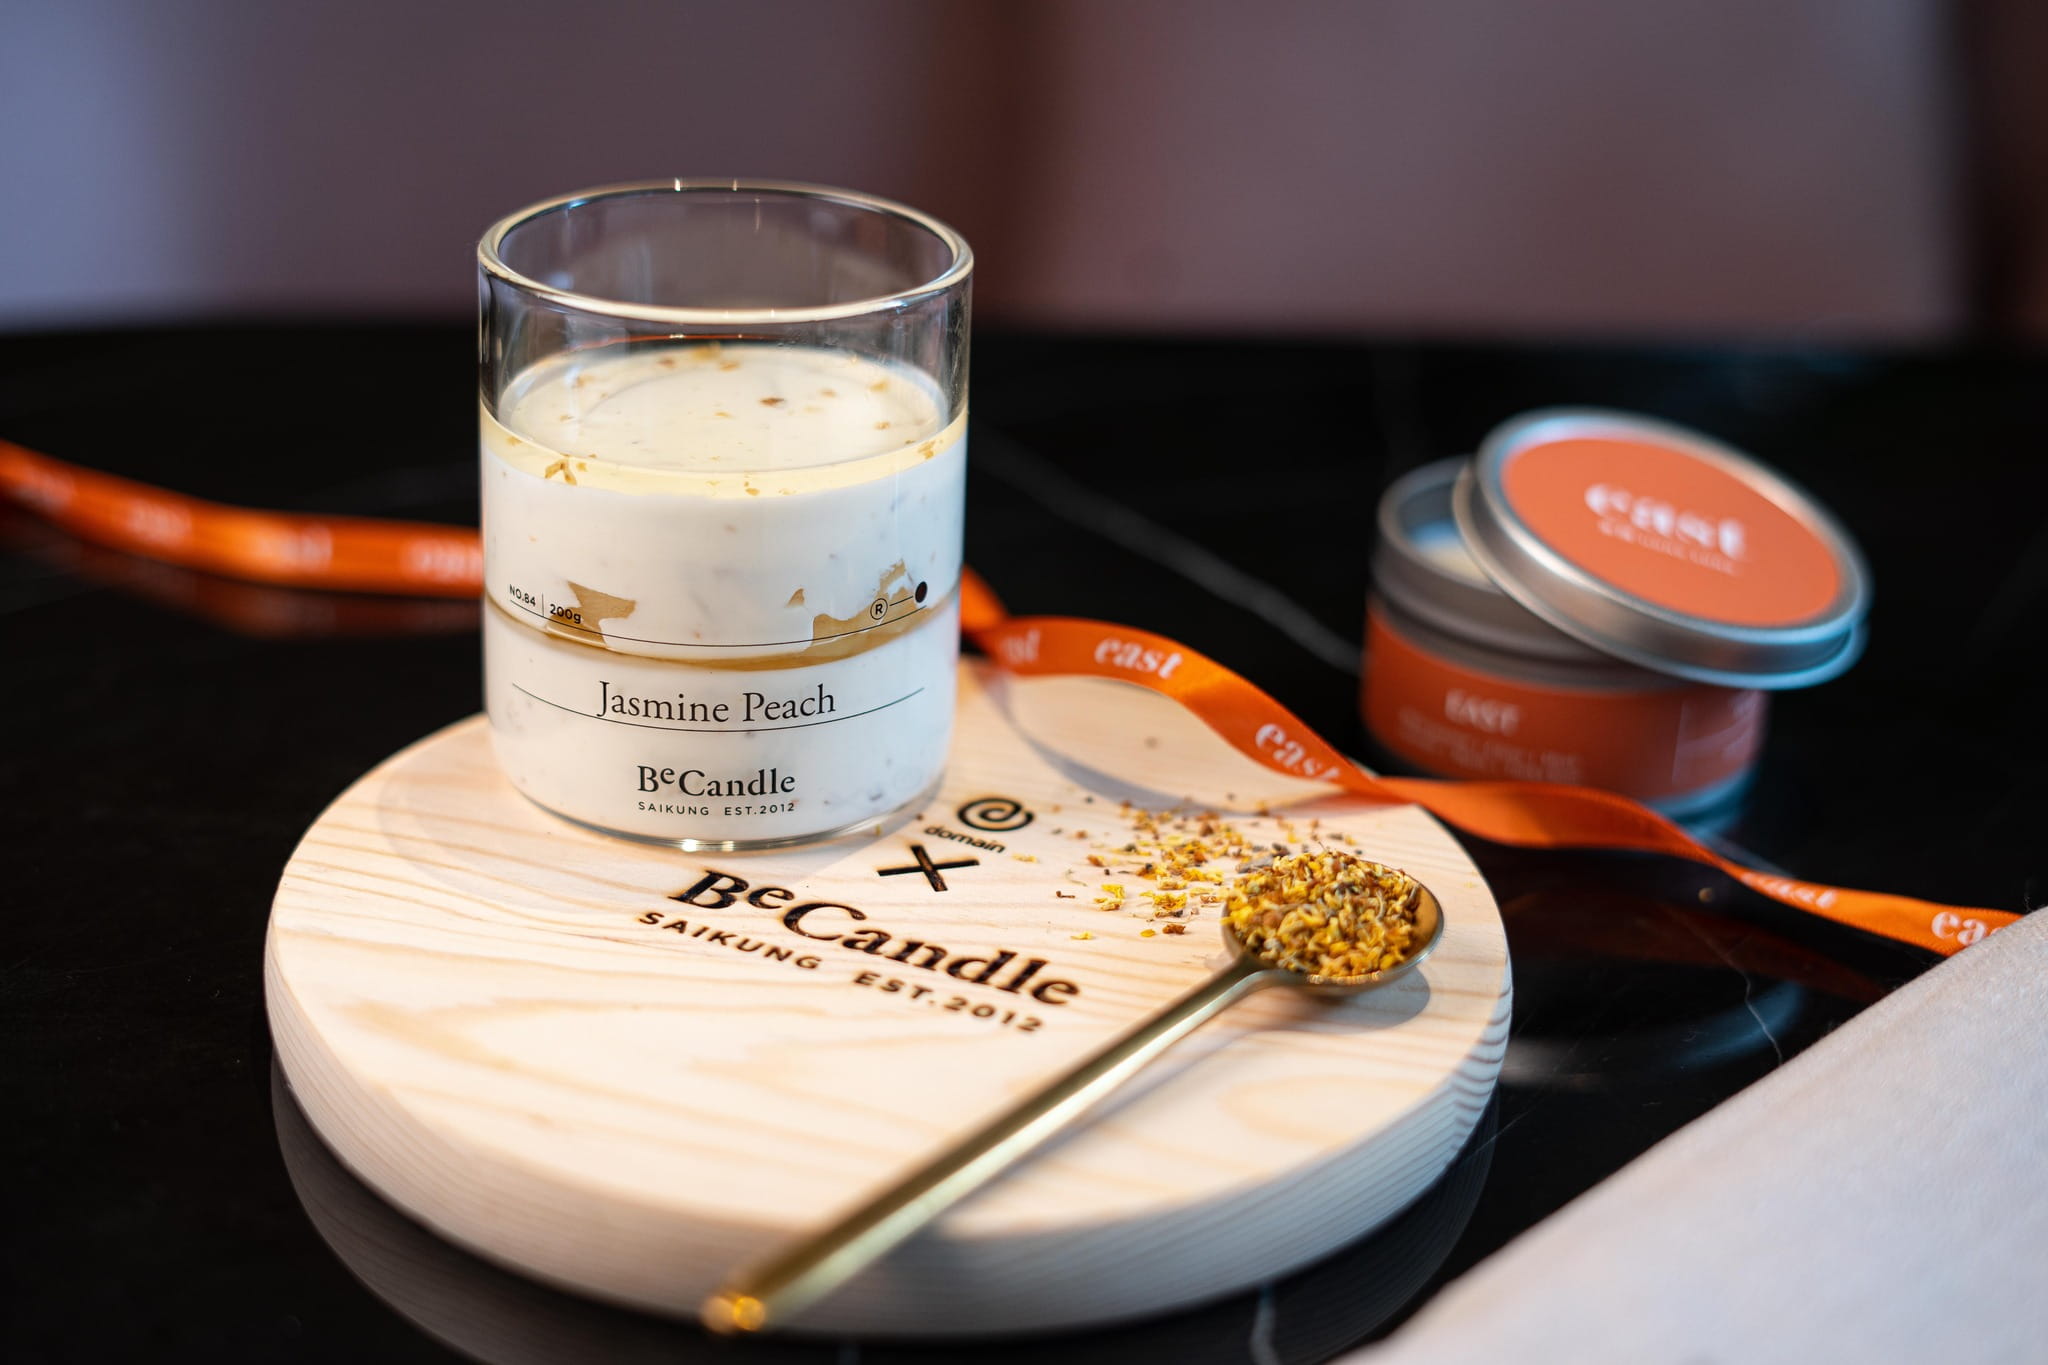 To beat the summer heat☀️, enjoy a refreshing Jasmine Peach Panna Cotta 🍮at Domain! 

Combining fruity sweetness with osmanthus’s floral flavours, this is a creative twist on @becandle_saikung's No.84 Jasmine Peach scent 🕯️

#atEAST #EASTHongKong #EATatEAST #findyourDOMAIN #DomainxBeCandle